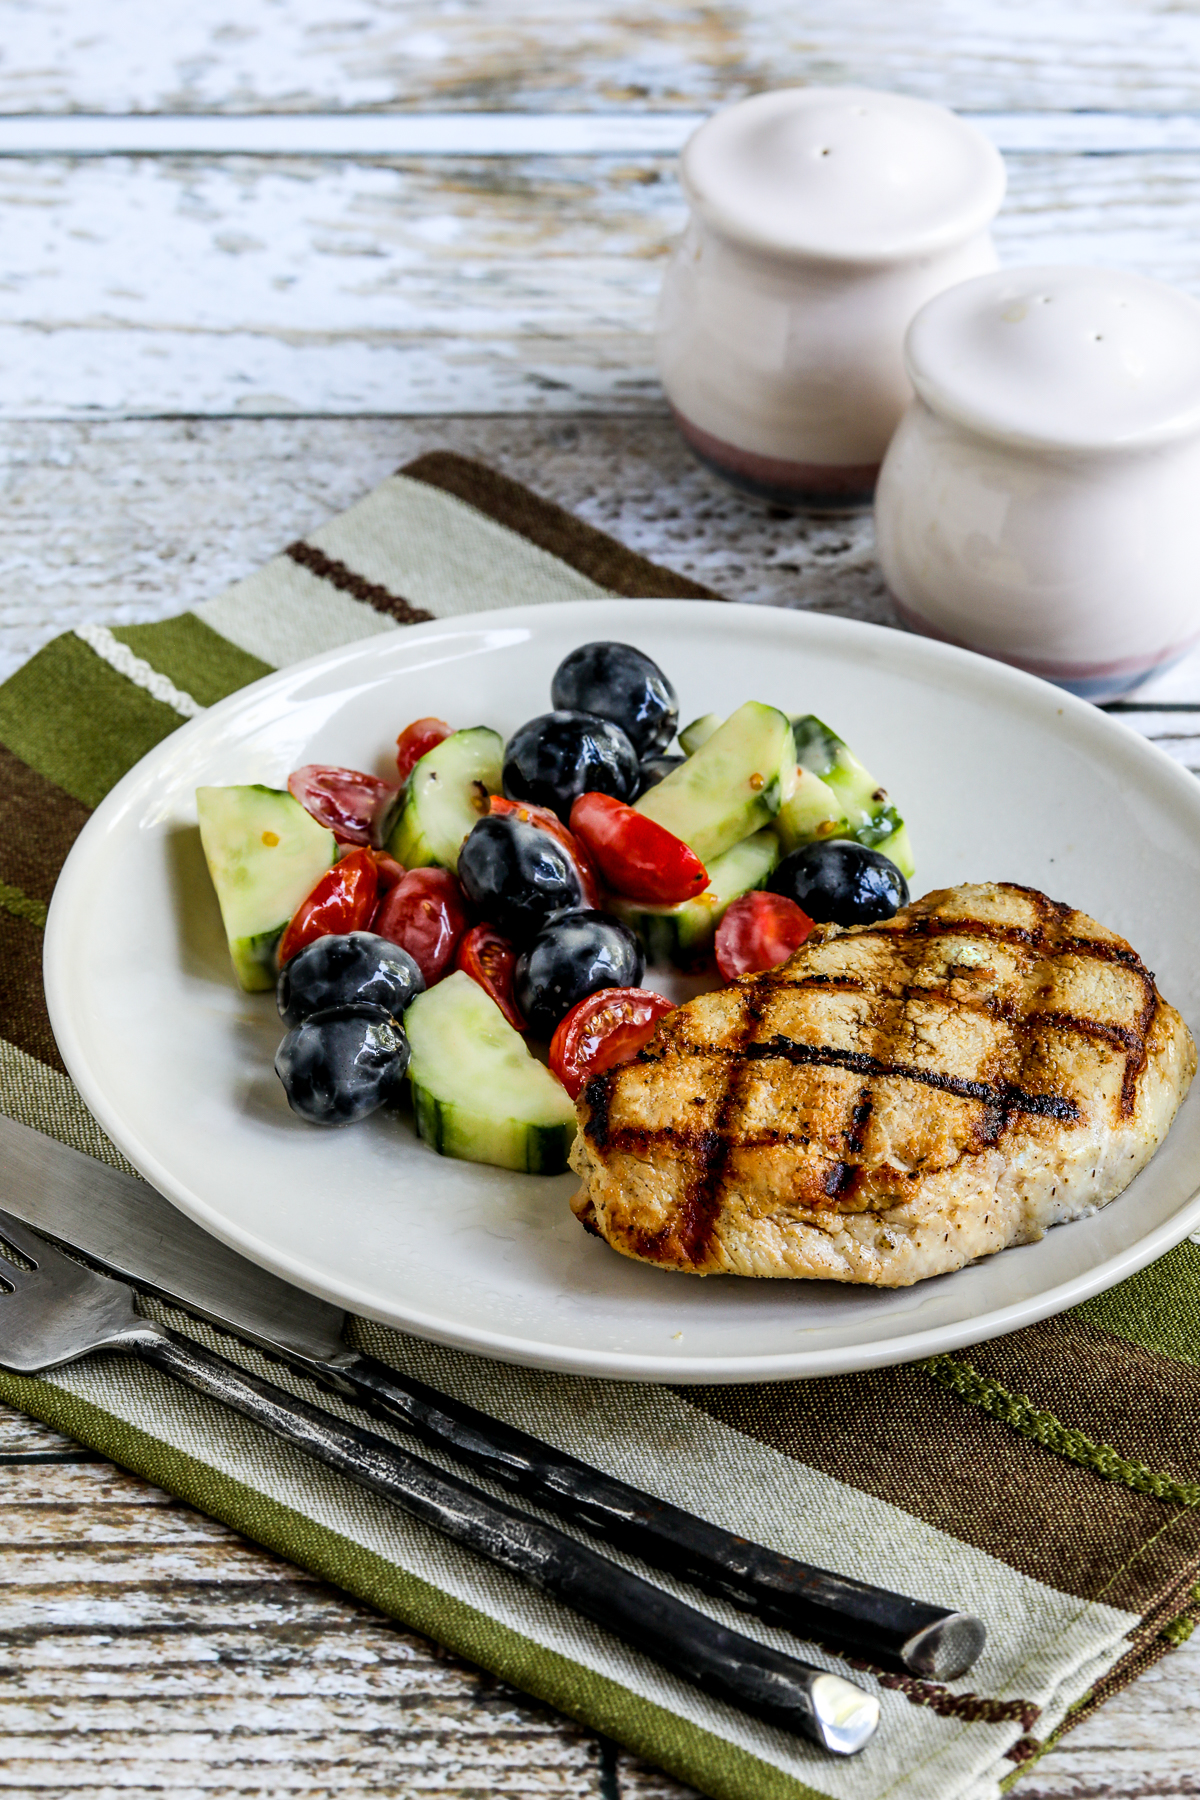 Grilled boneless pork chops are served on a plate with salad.